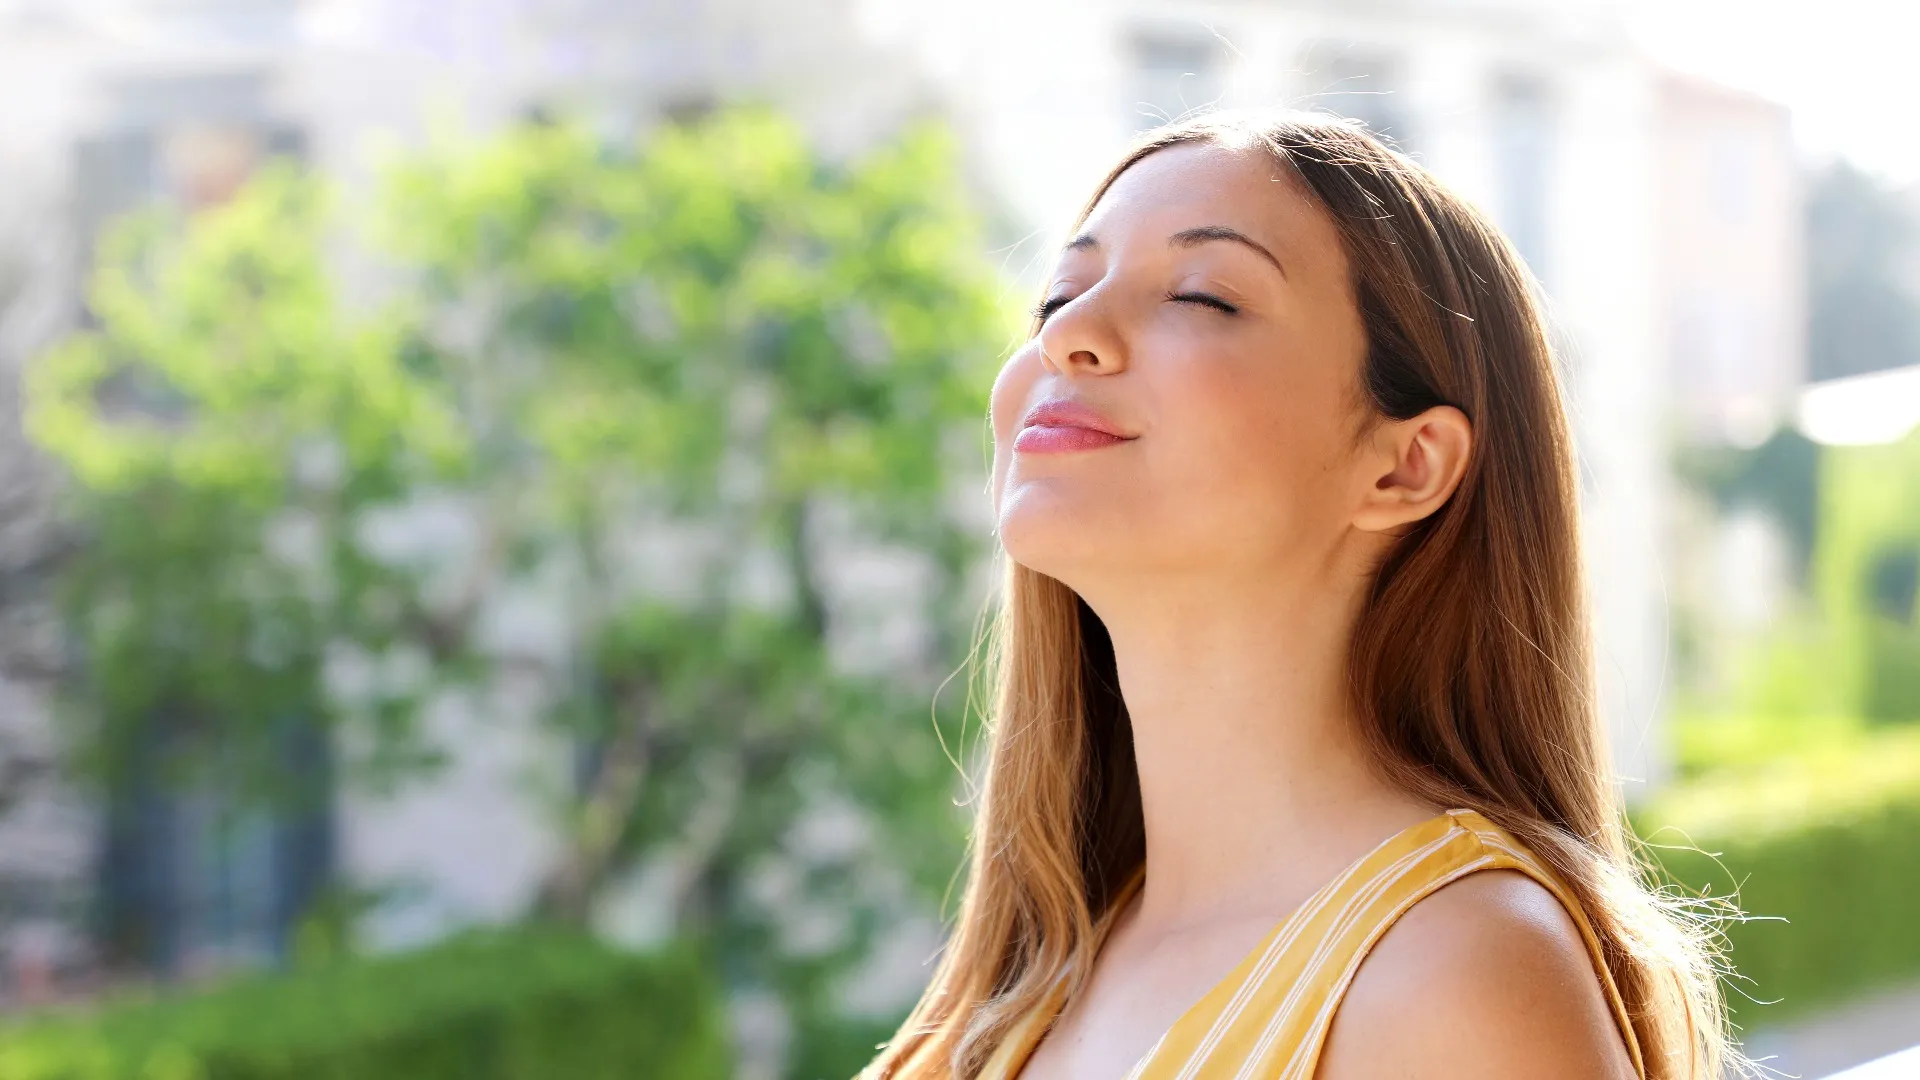 Deep Breathing, Stress, and Your Health